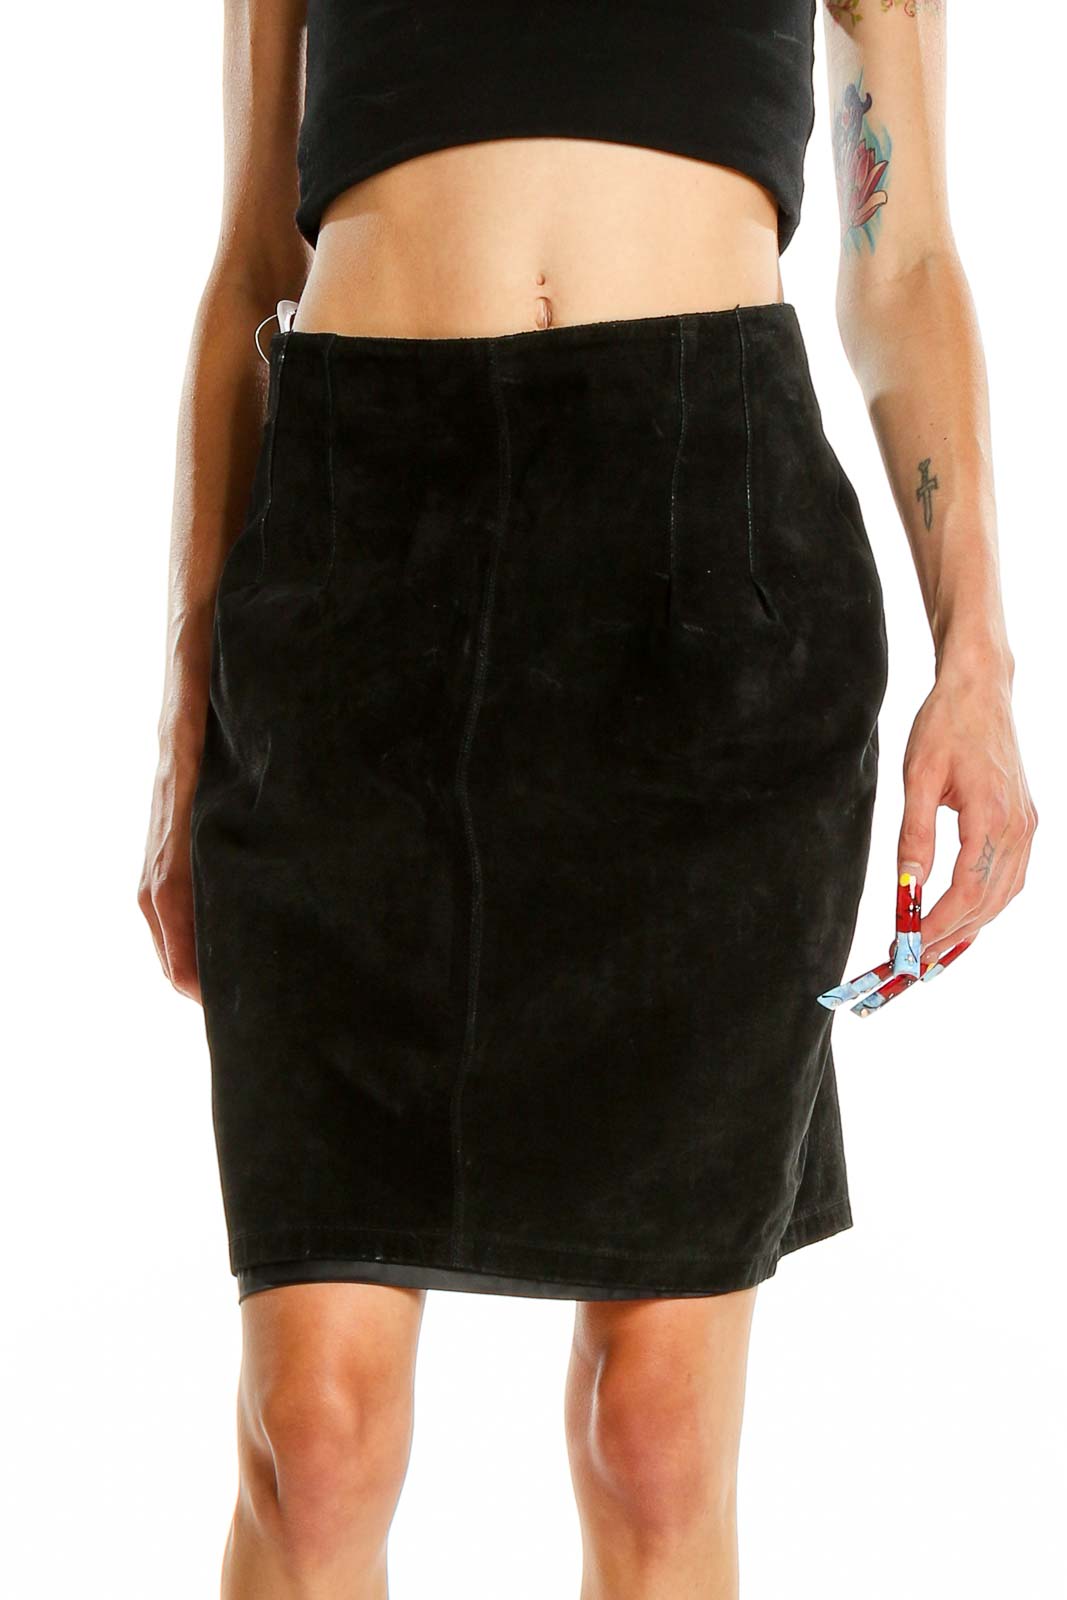 Black Chic Leather Pencil Skirt Front